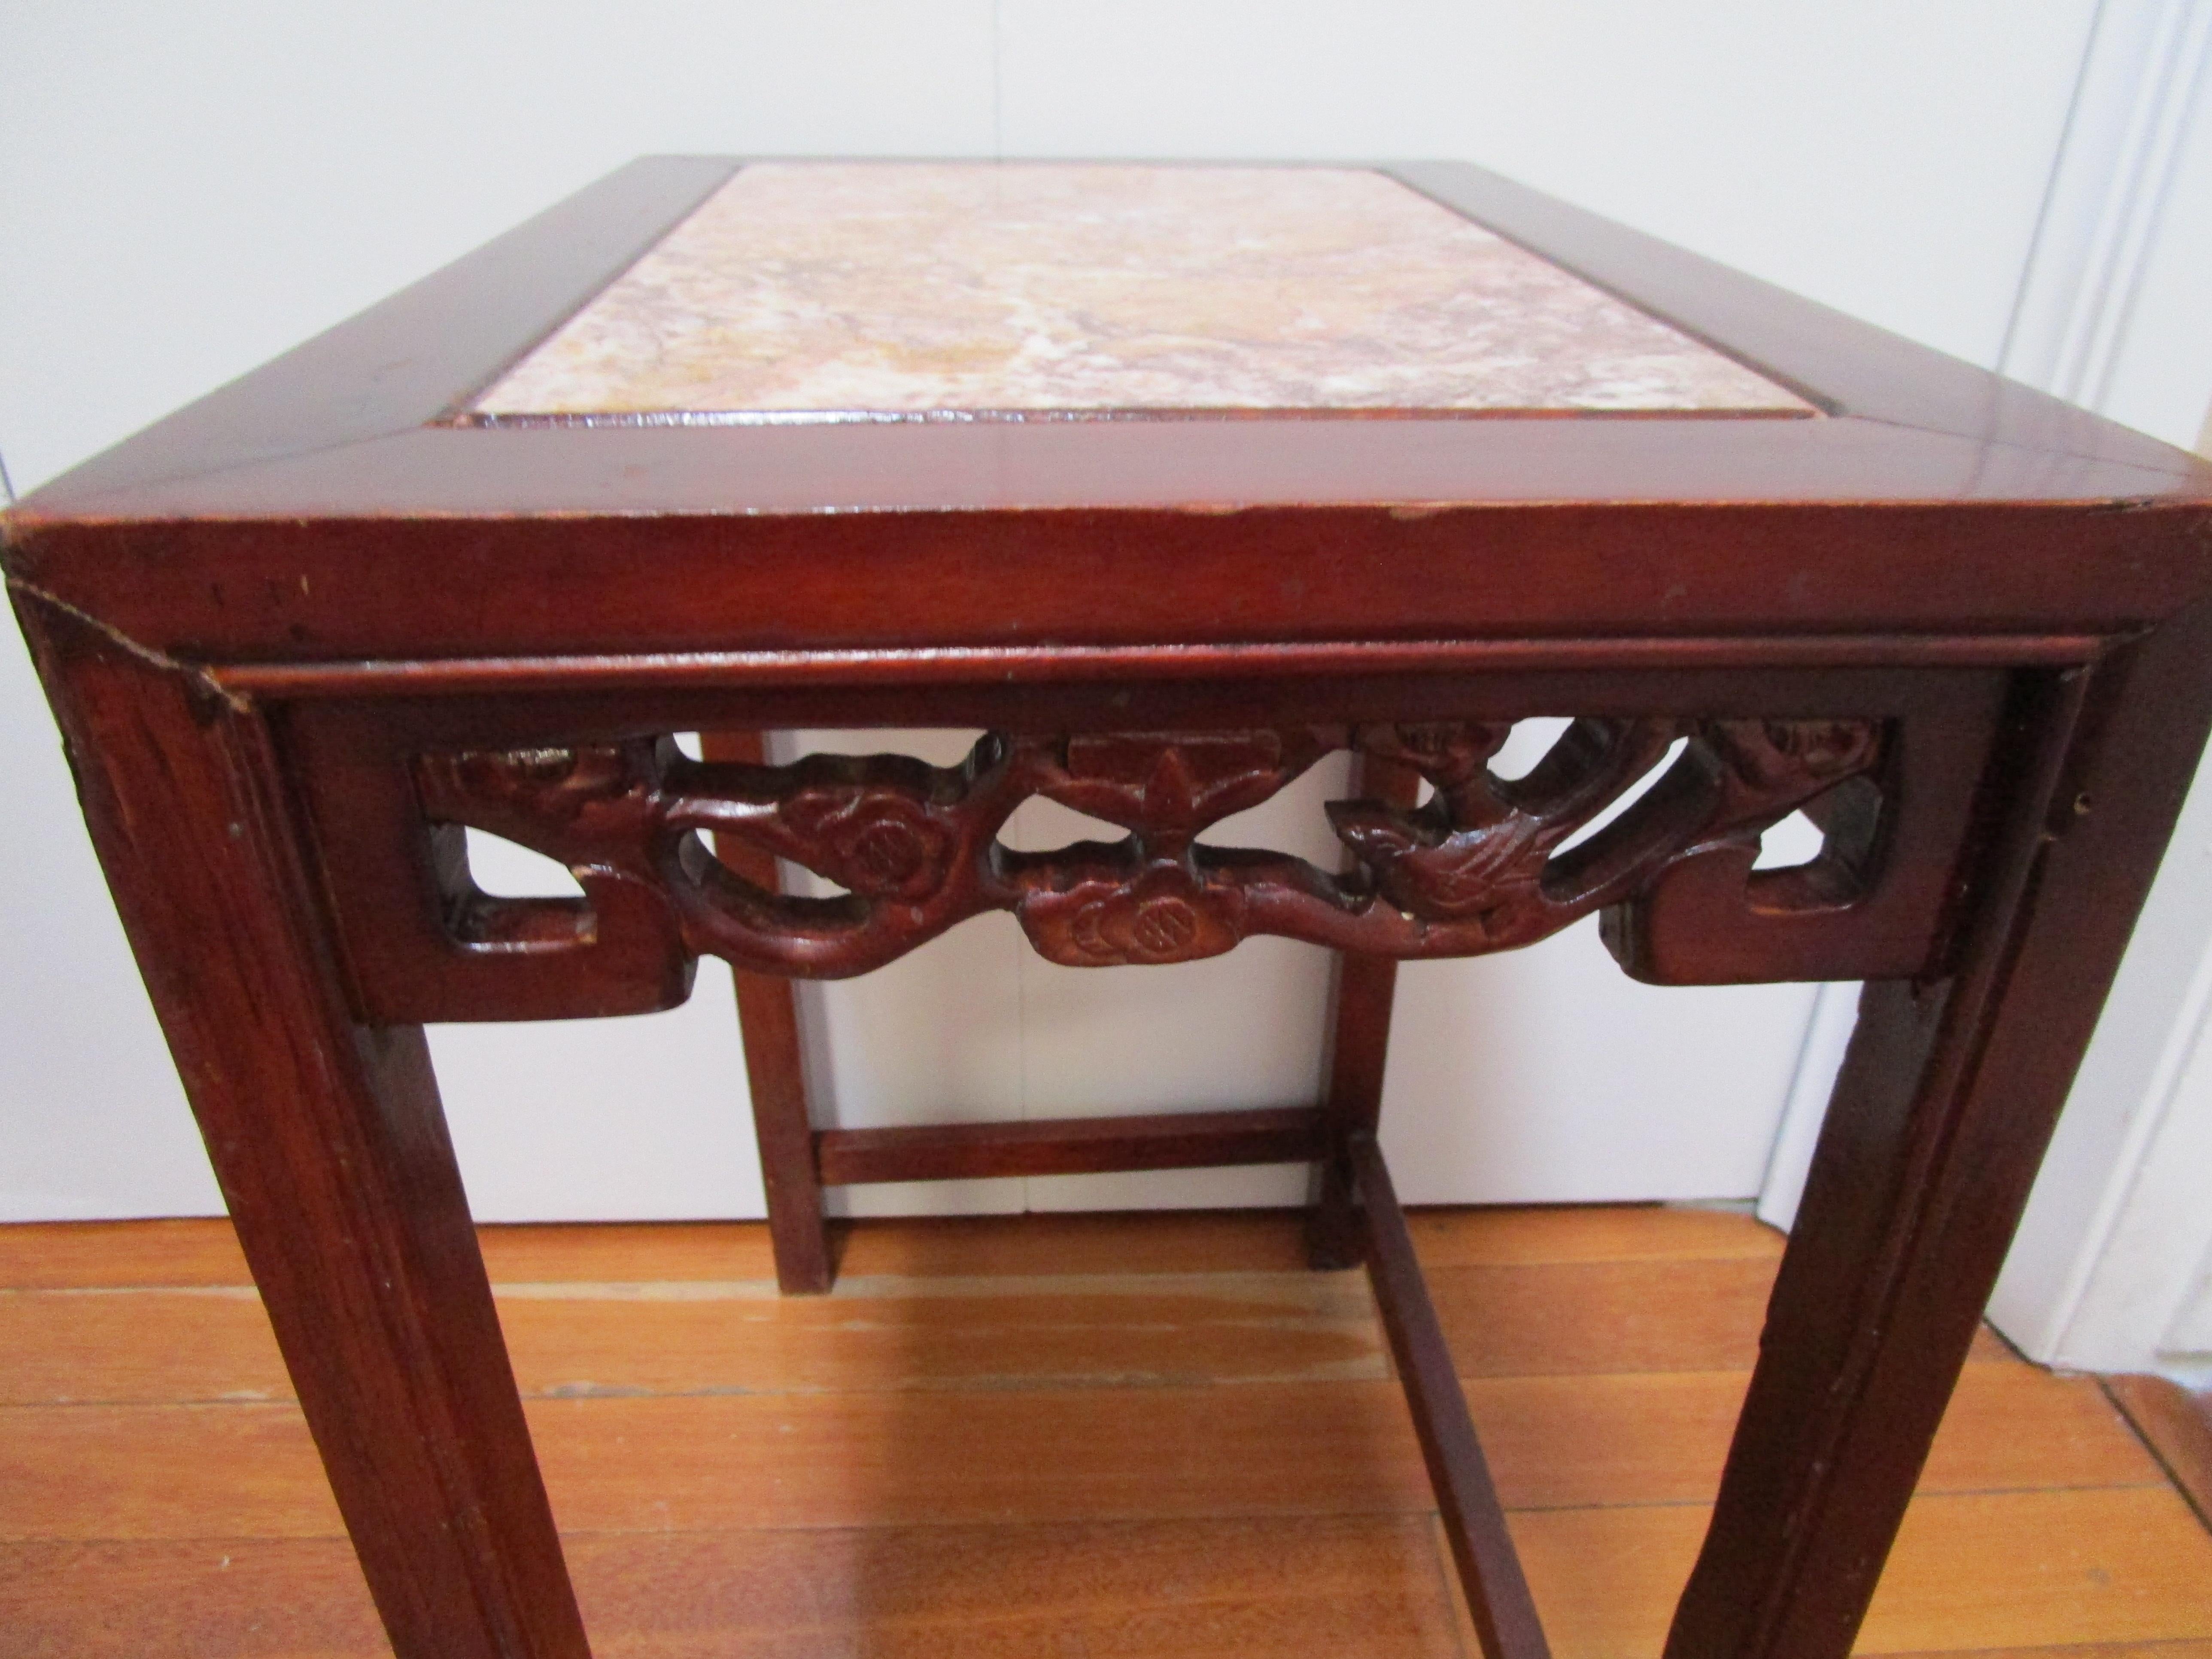 The beautiful captured top makes this table a standout. The rosewood table is also interesting for its hand-carved birds and flowers around the front, back and sides of the piece. Our appraiser says it is likely that this table became separated from